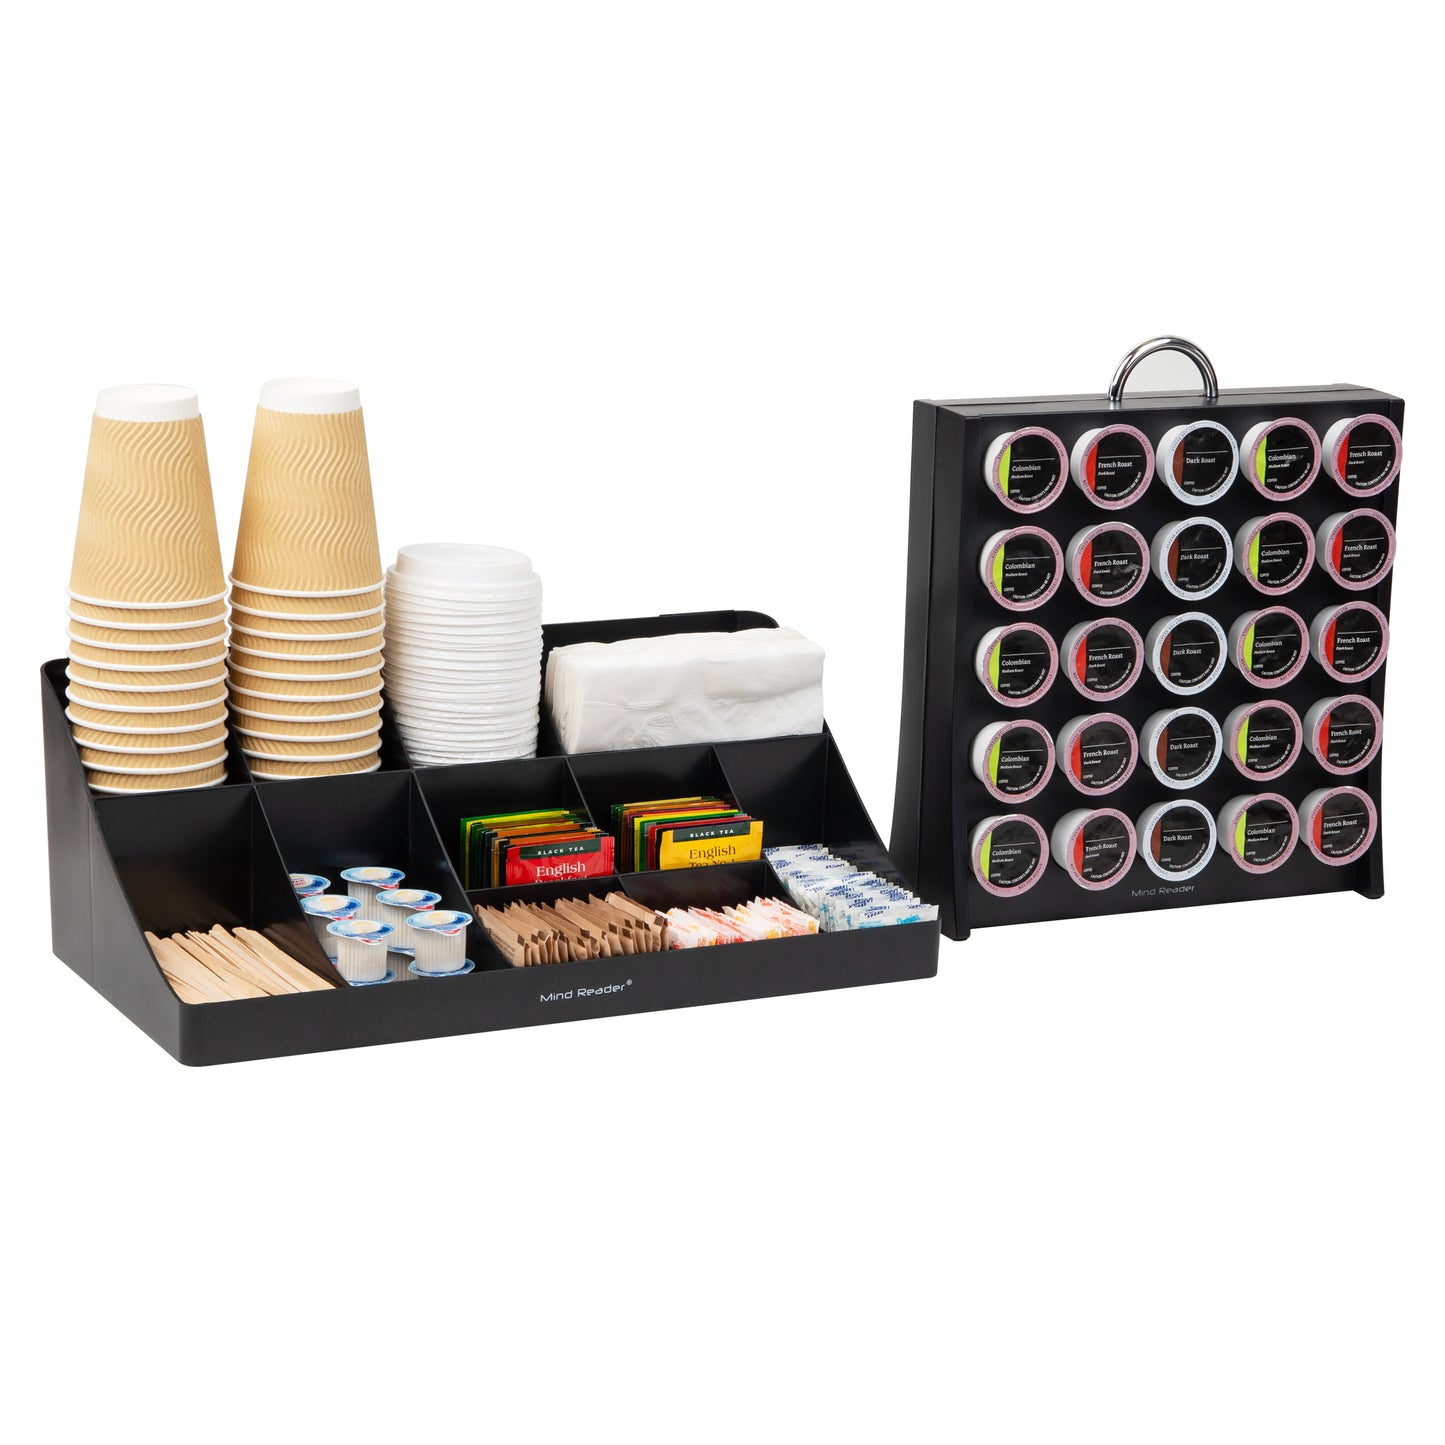 Mind Reader Anchor Collection, 15-Compartment, 2-Tier Cup and Condiment Storage, 17.875"L x 9.5"W x 6.625"H, and Double-Sided Single Serve Coffee Pod Storage, 50 Pod Capacity, 12"L x 4"W x 14"H, Countertop Set,  Black